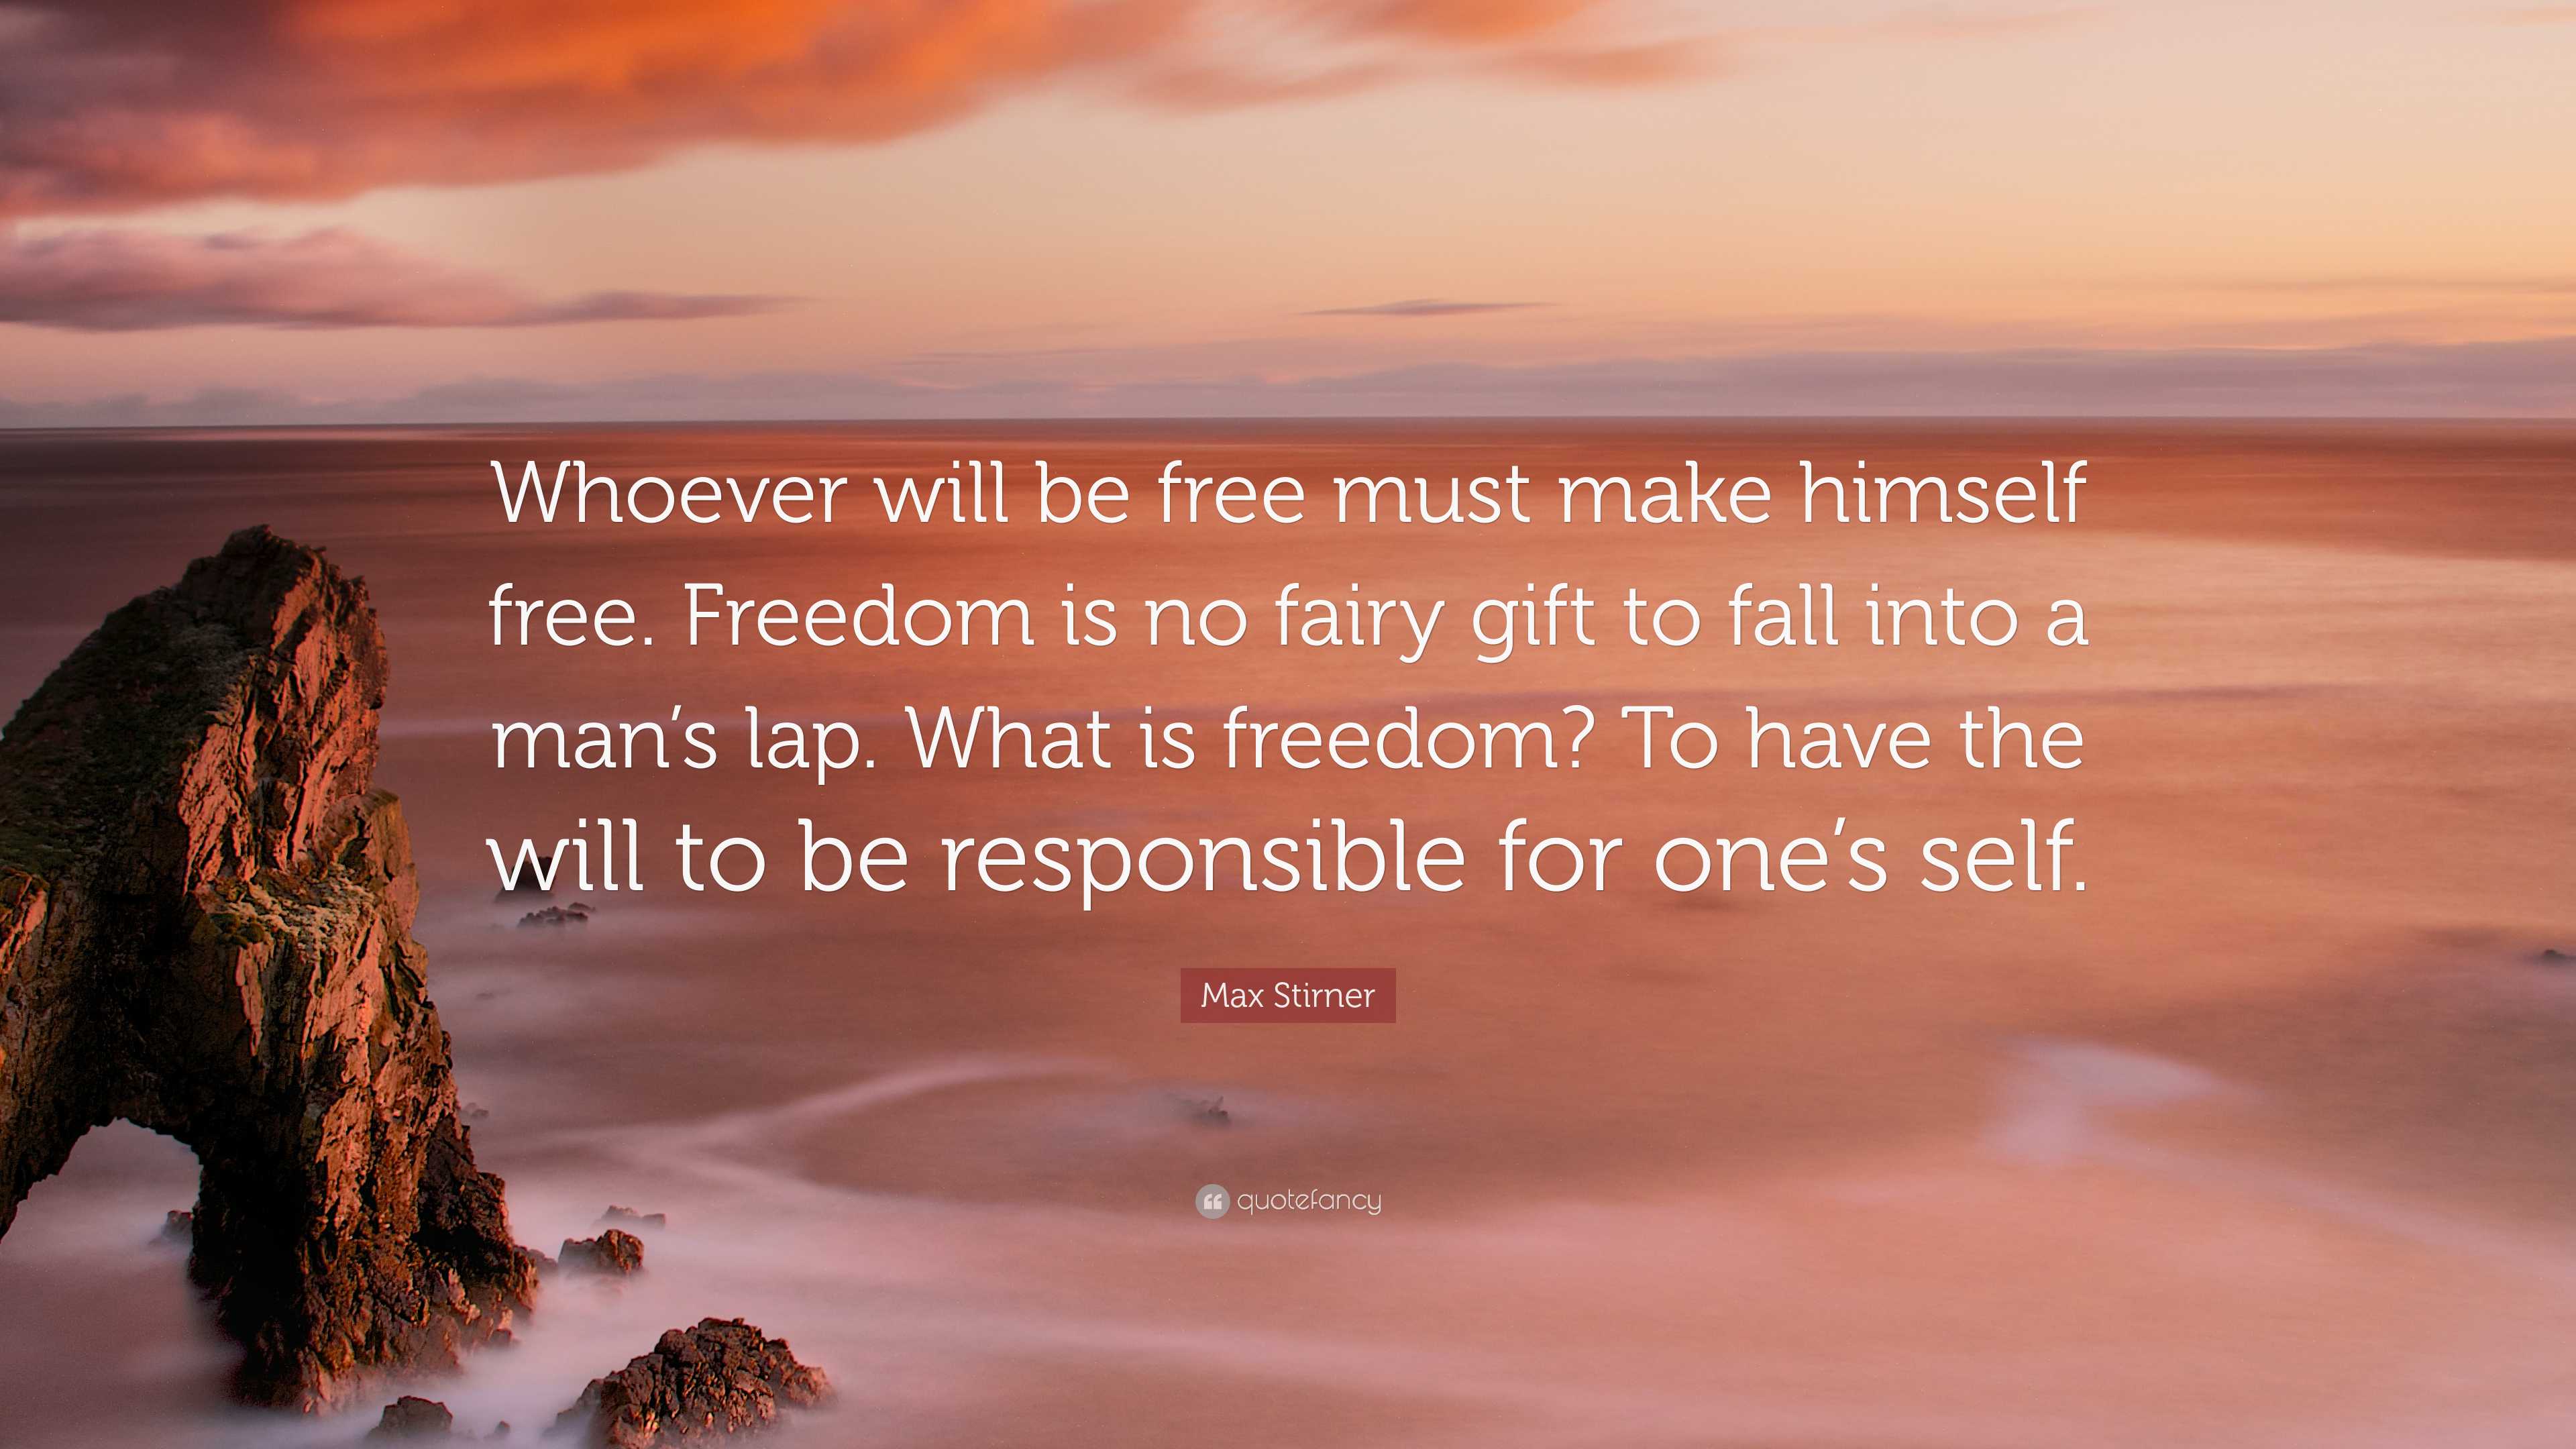 Be Free Inspirational Quote About Freedom 库存矢量图（免版税）443834833